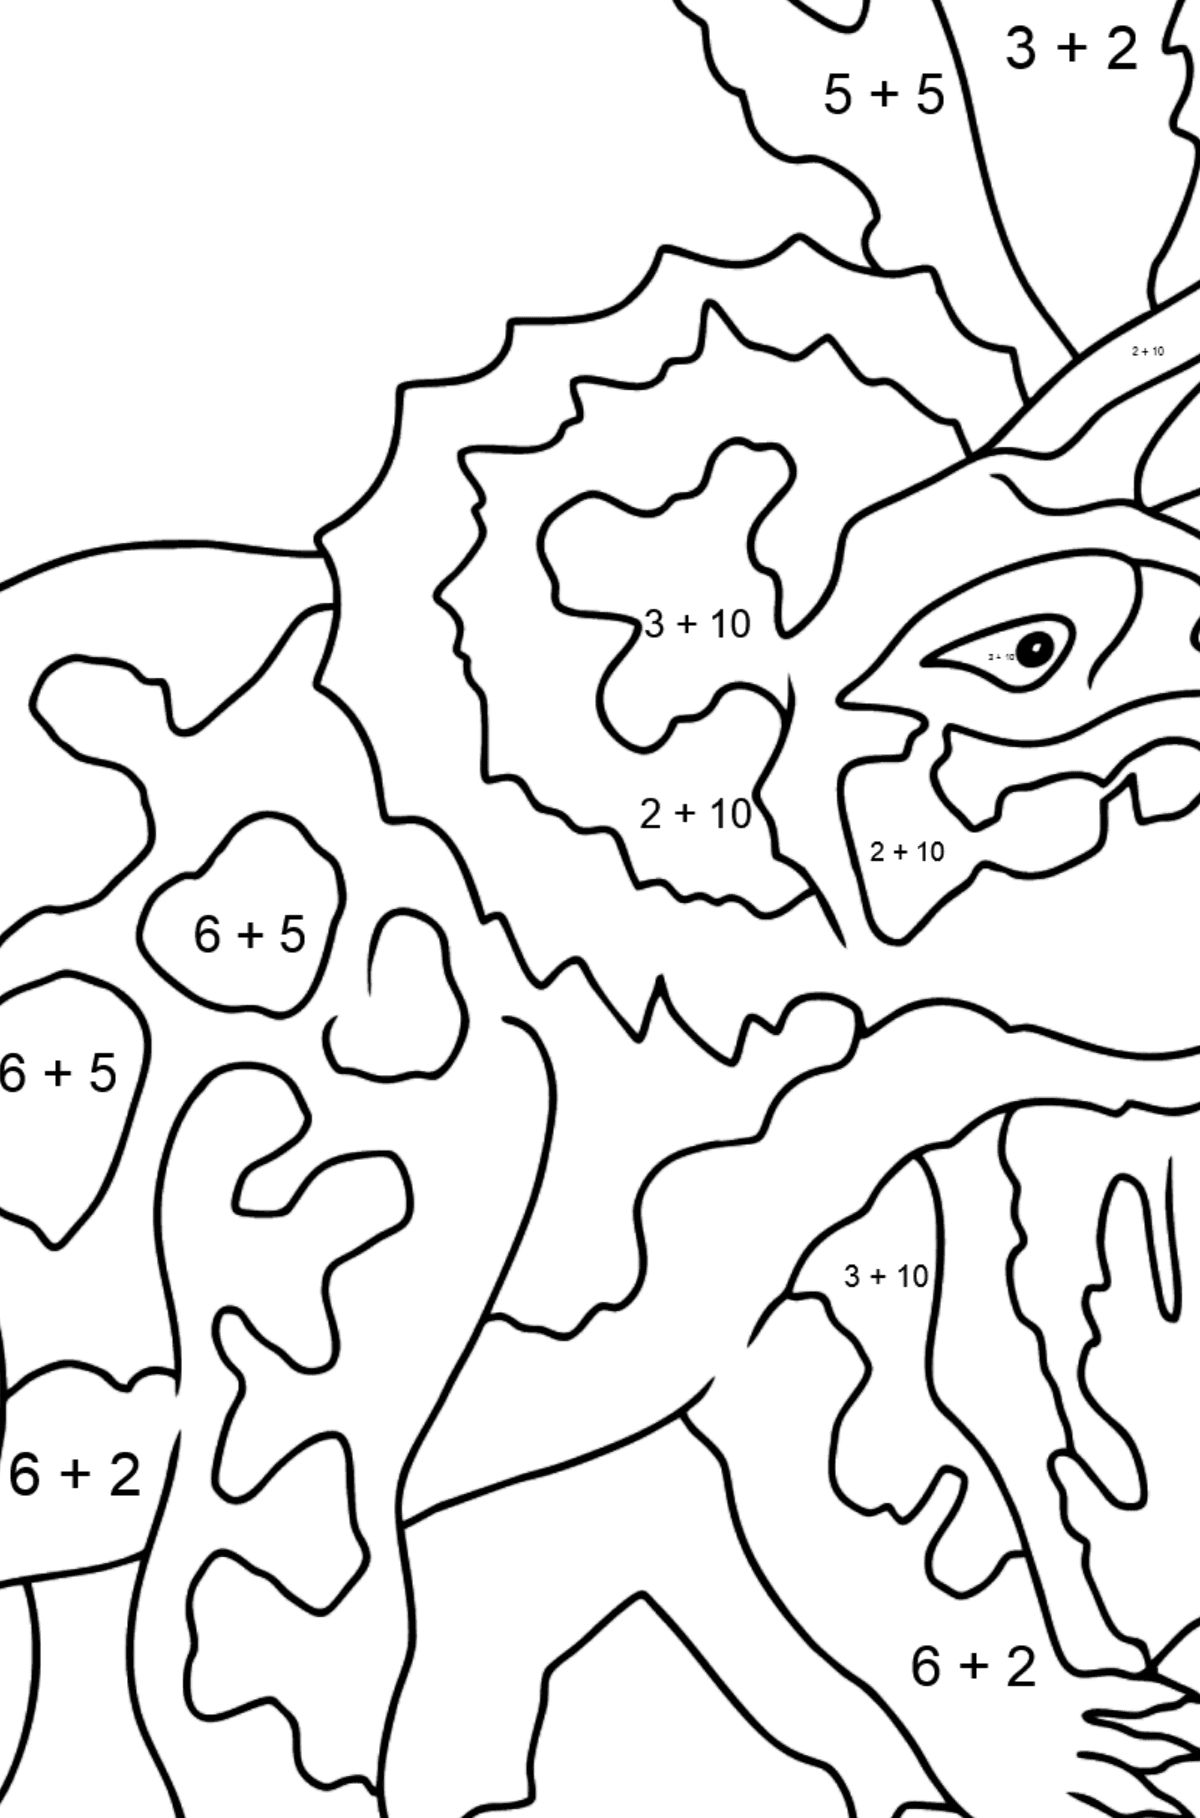 Coloring Page - Triceratops - A Peaceful Horned Dinosaur - Math Coloring - Addition for Kids